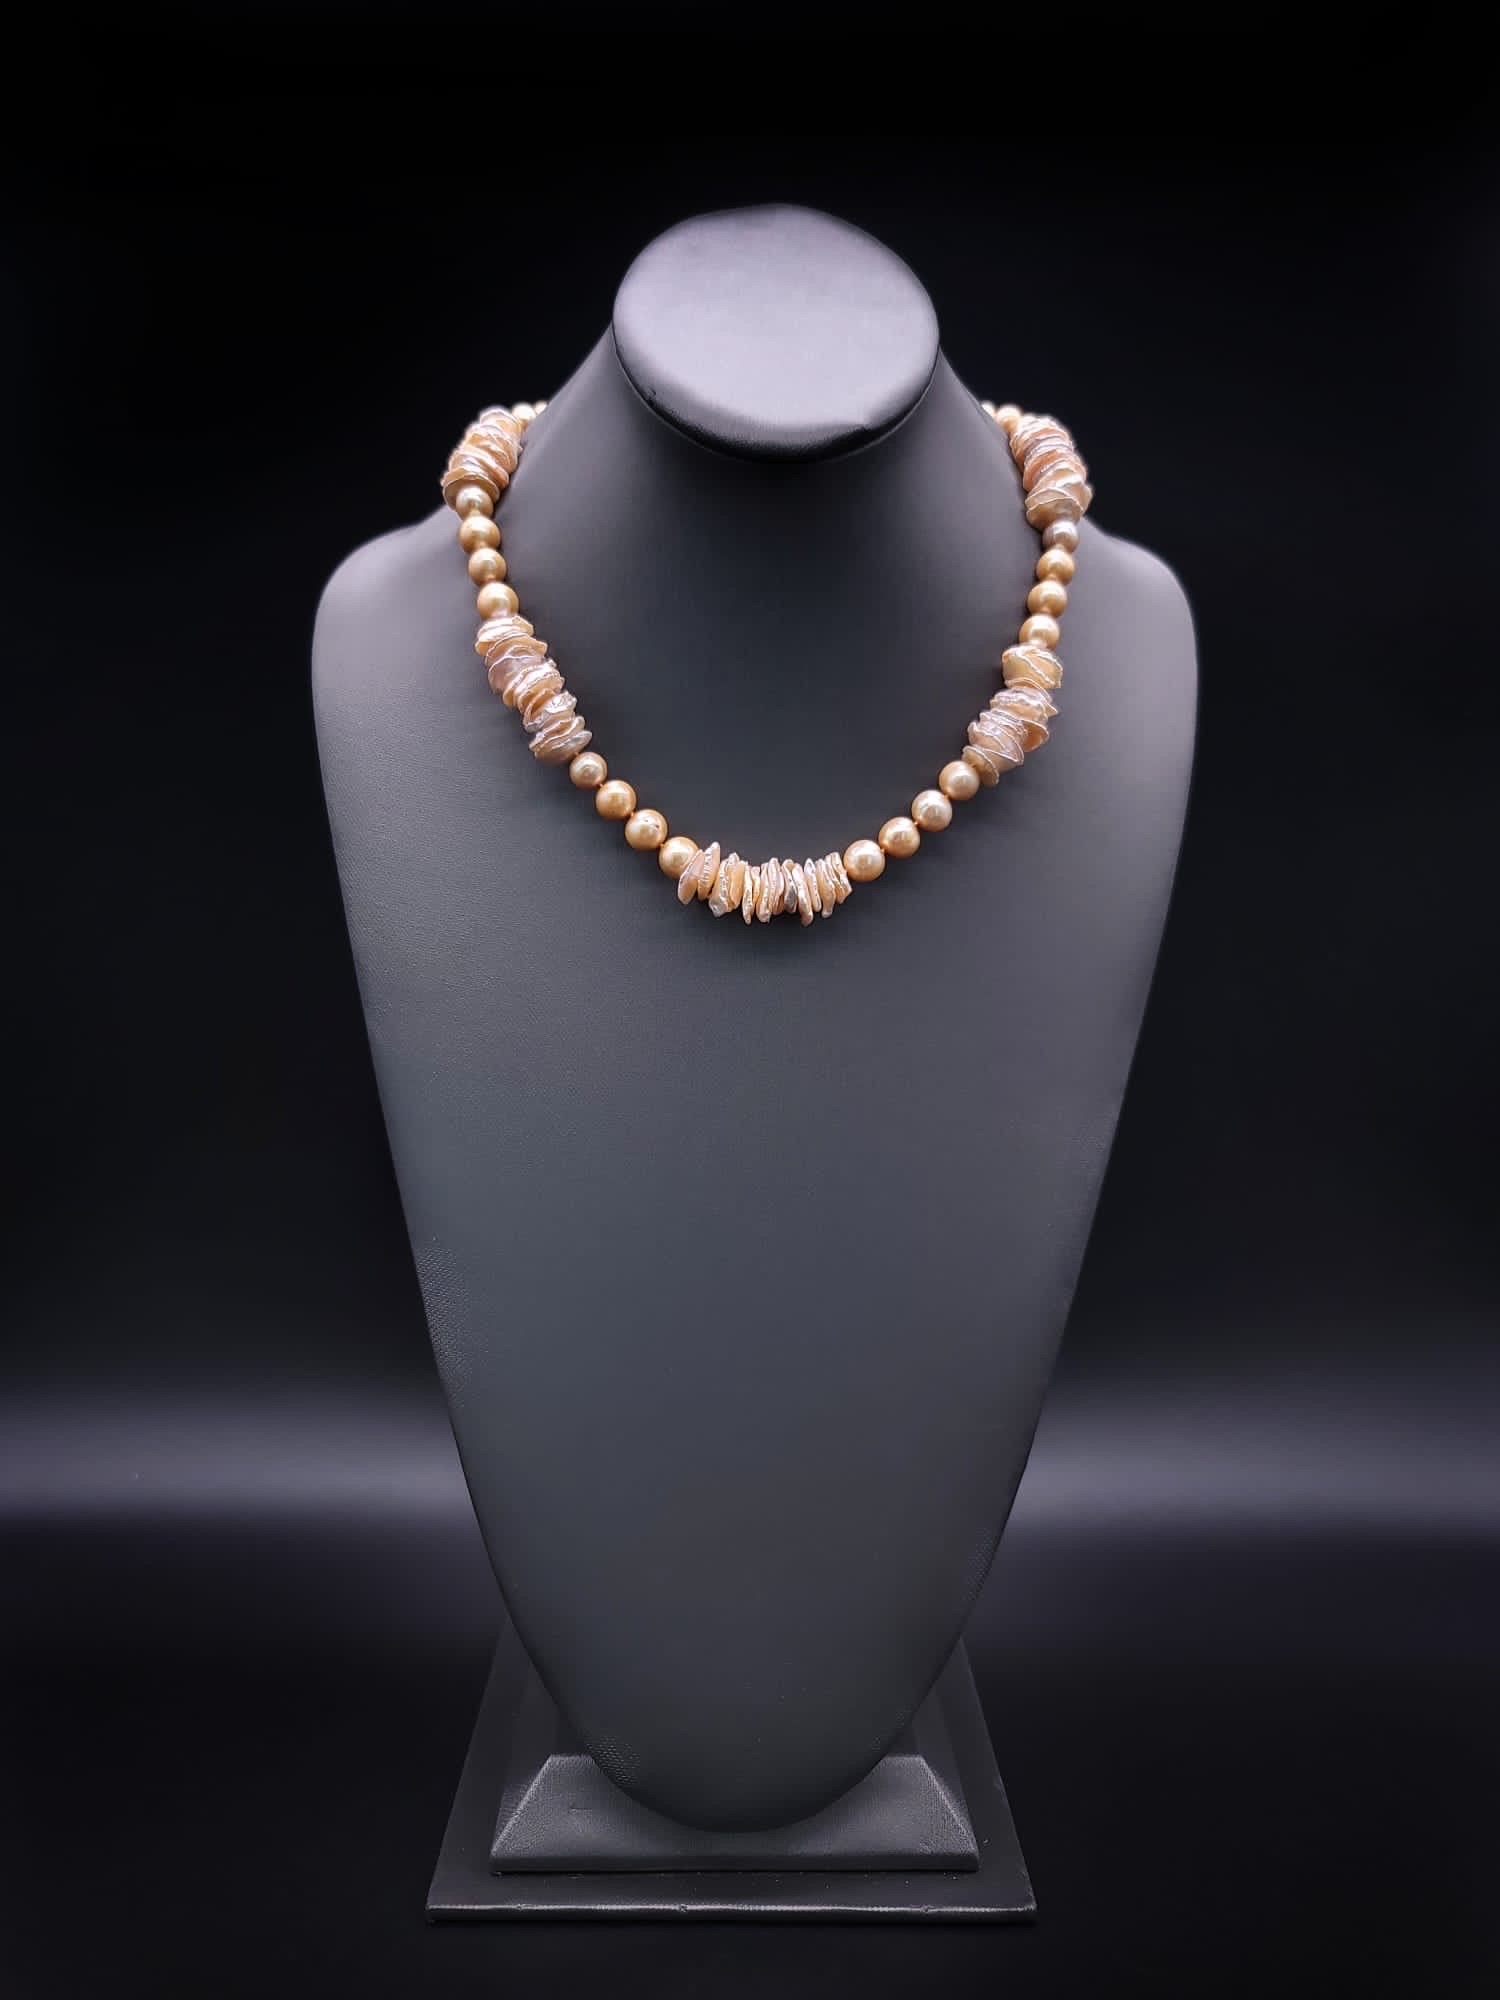 A.Jeschel Exquisite One-of-a-Kind Gold Pearl Necklace. For Sale